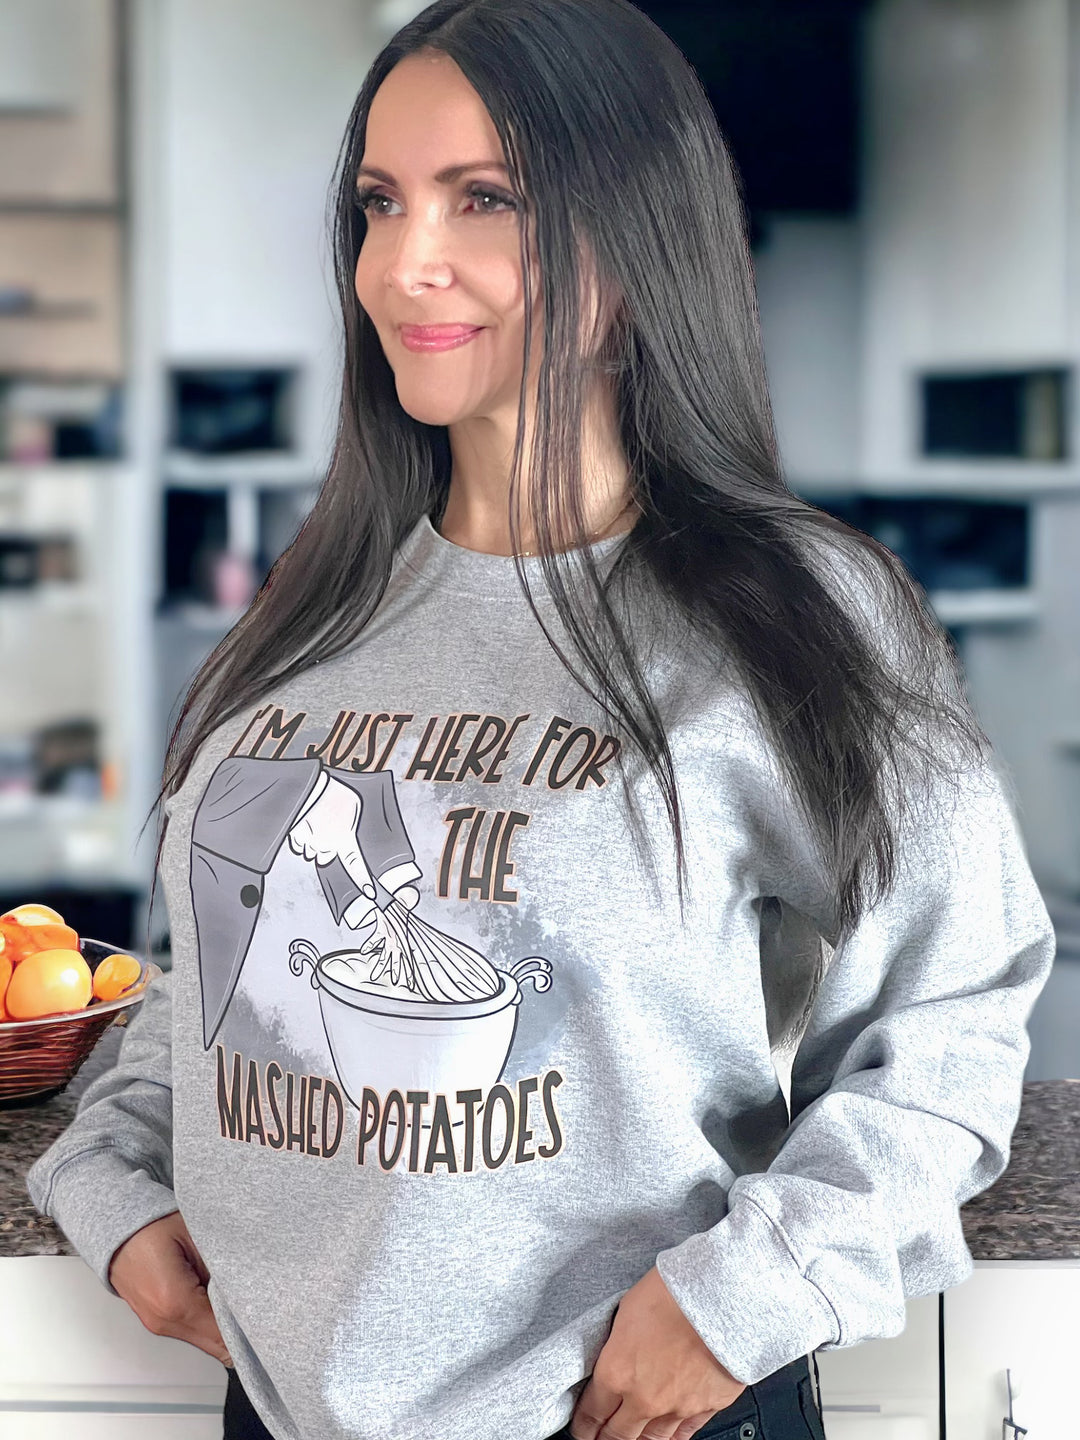 I'm Just Here For The Mashed Potatoes Crewneck Sweatshirt